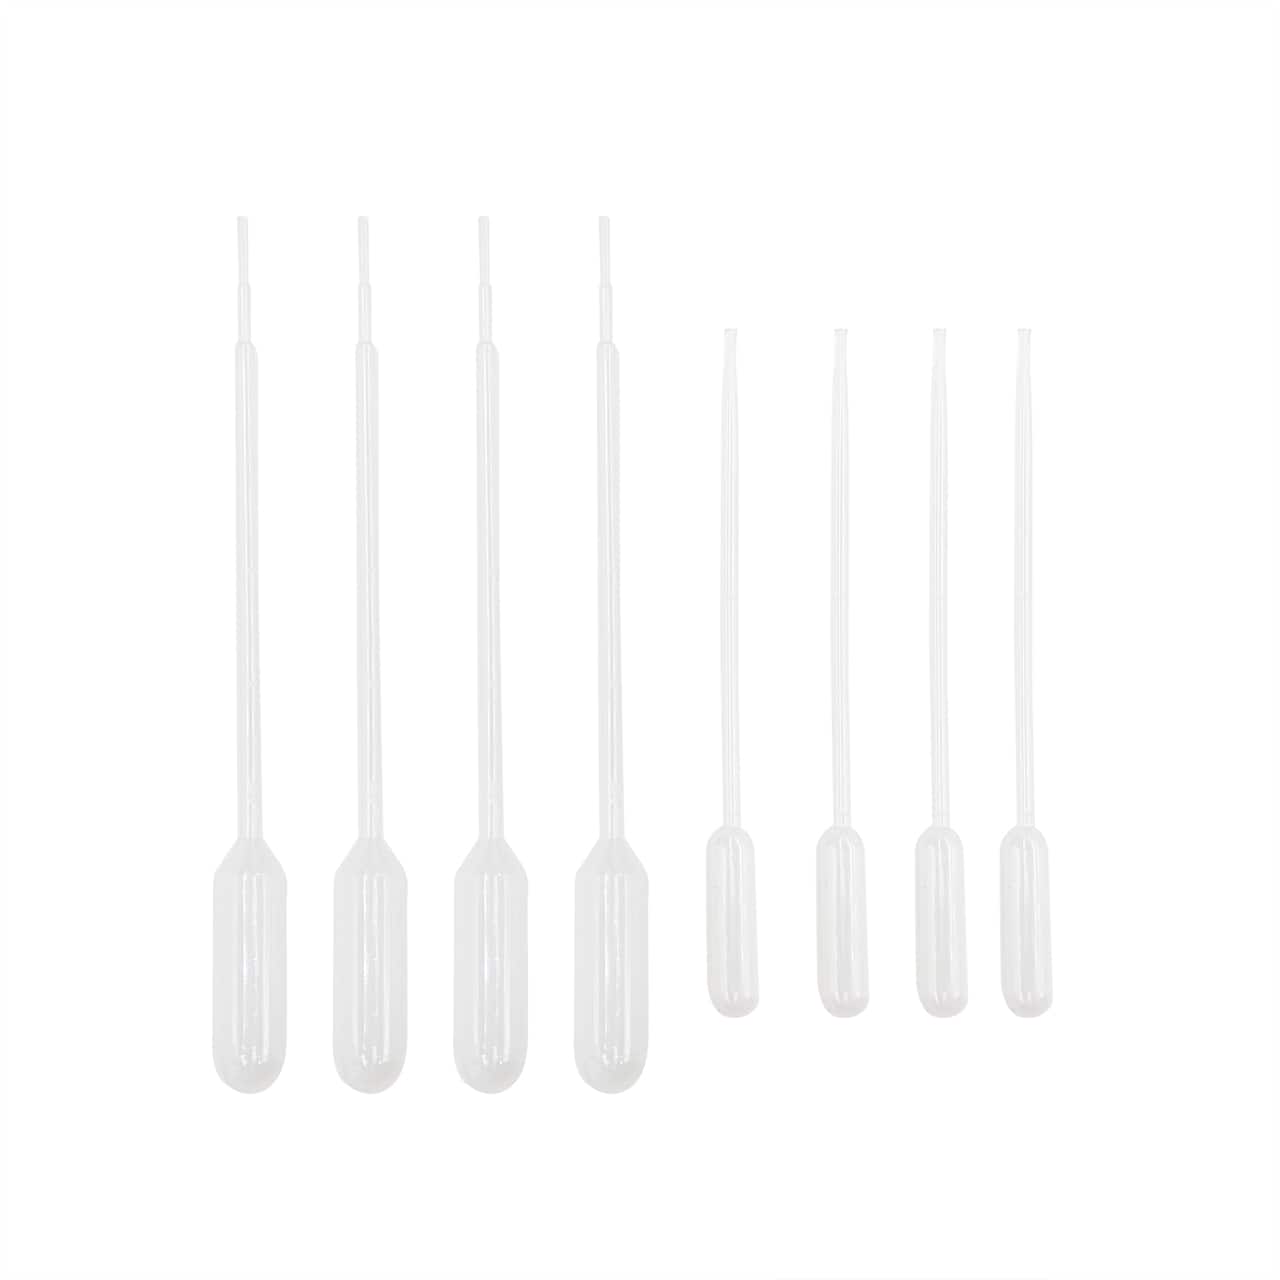 6 Packs: 40 ct. (240 total) Plastic Pipettes by Make Market&#xAE;